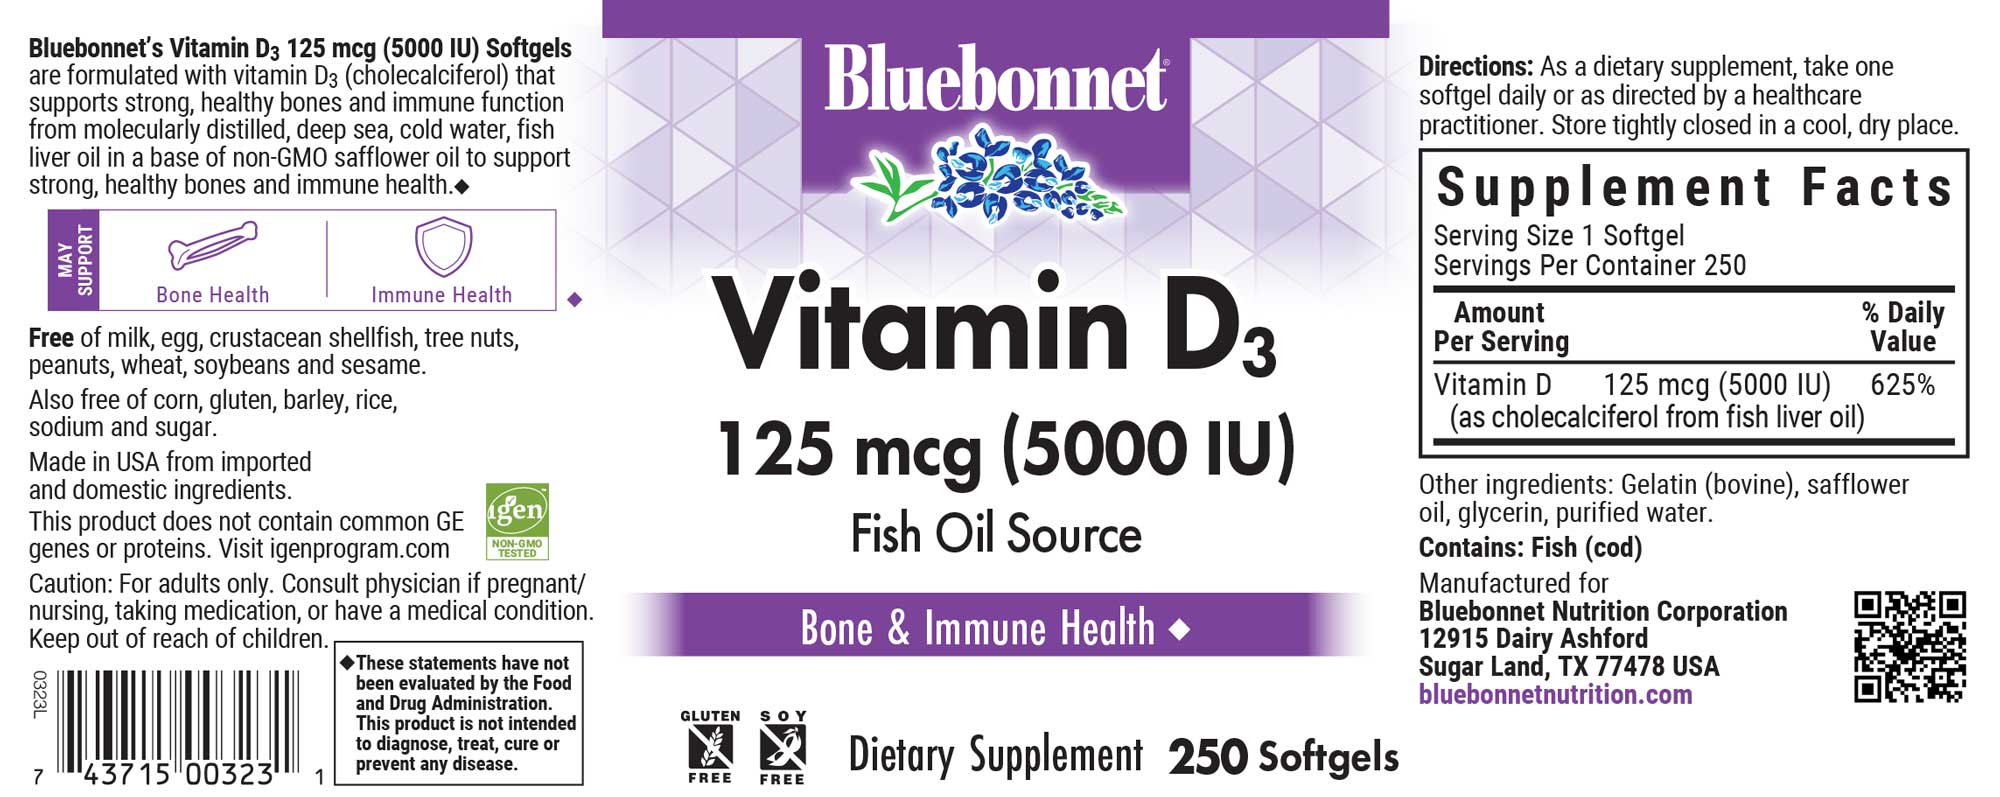 Bluebonnet’s Vitamin D3 5000 IU (125 mcg) 250 Softgels are formulated with vitamin D3 (cholecalciferol) that supports strong healthy bones and immune function from molecularly distilled, deep sea, cold water, fish liver oil in a base of non-GMO safflower oil. #size_250 count